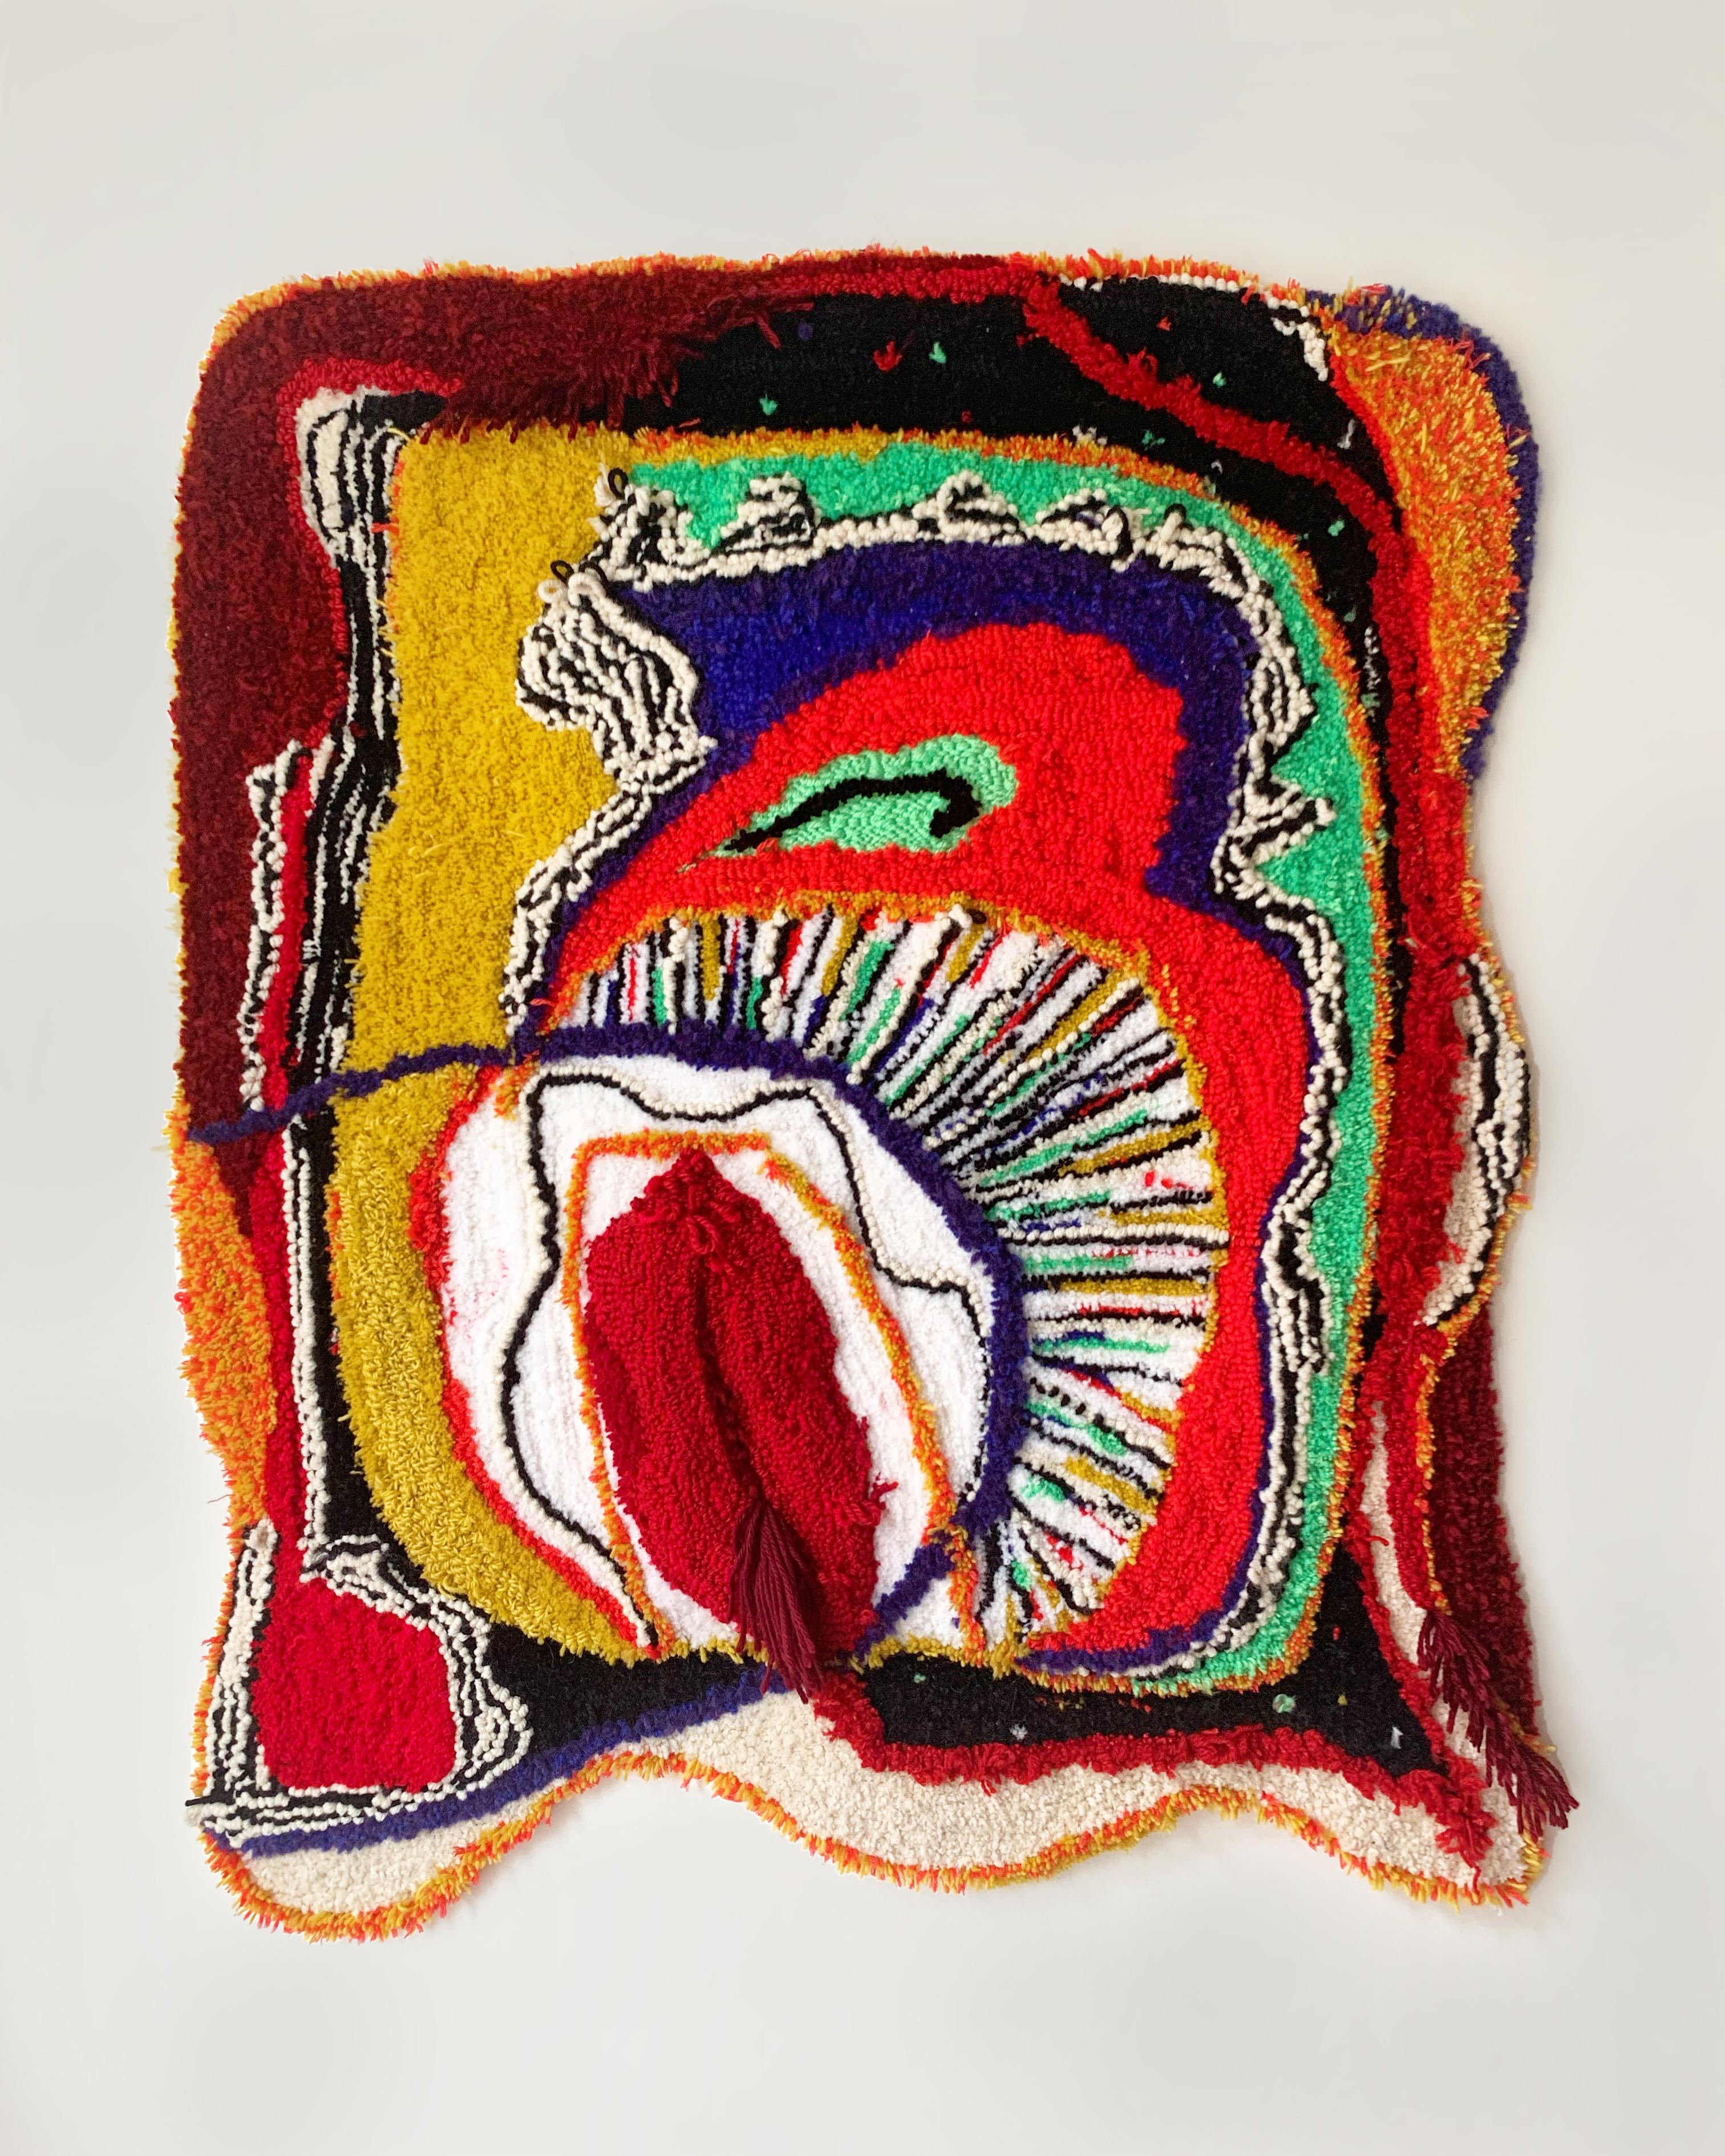 histérica #1, red abstract wall hanging, fiber art, textured textile - Sculpture by Ana Maria Farina